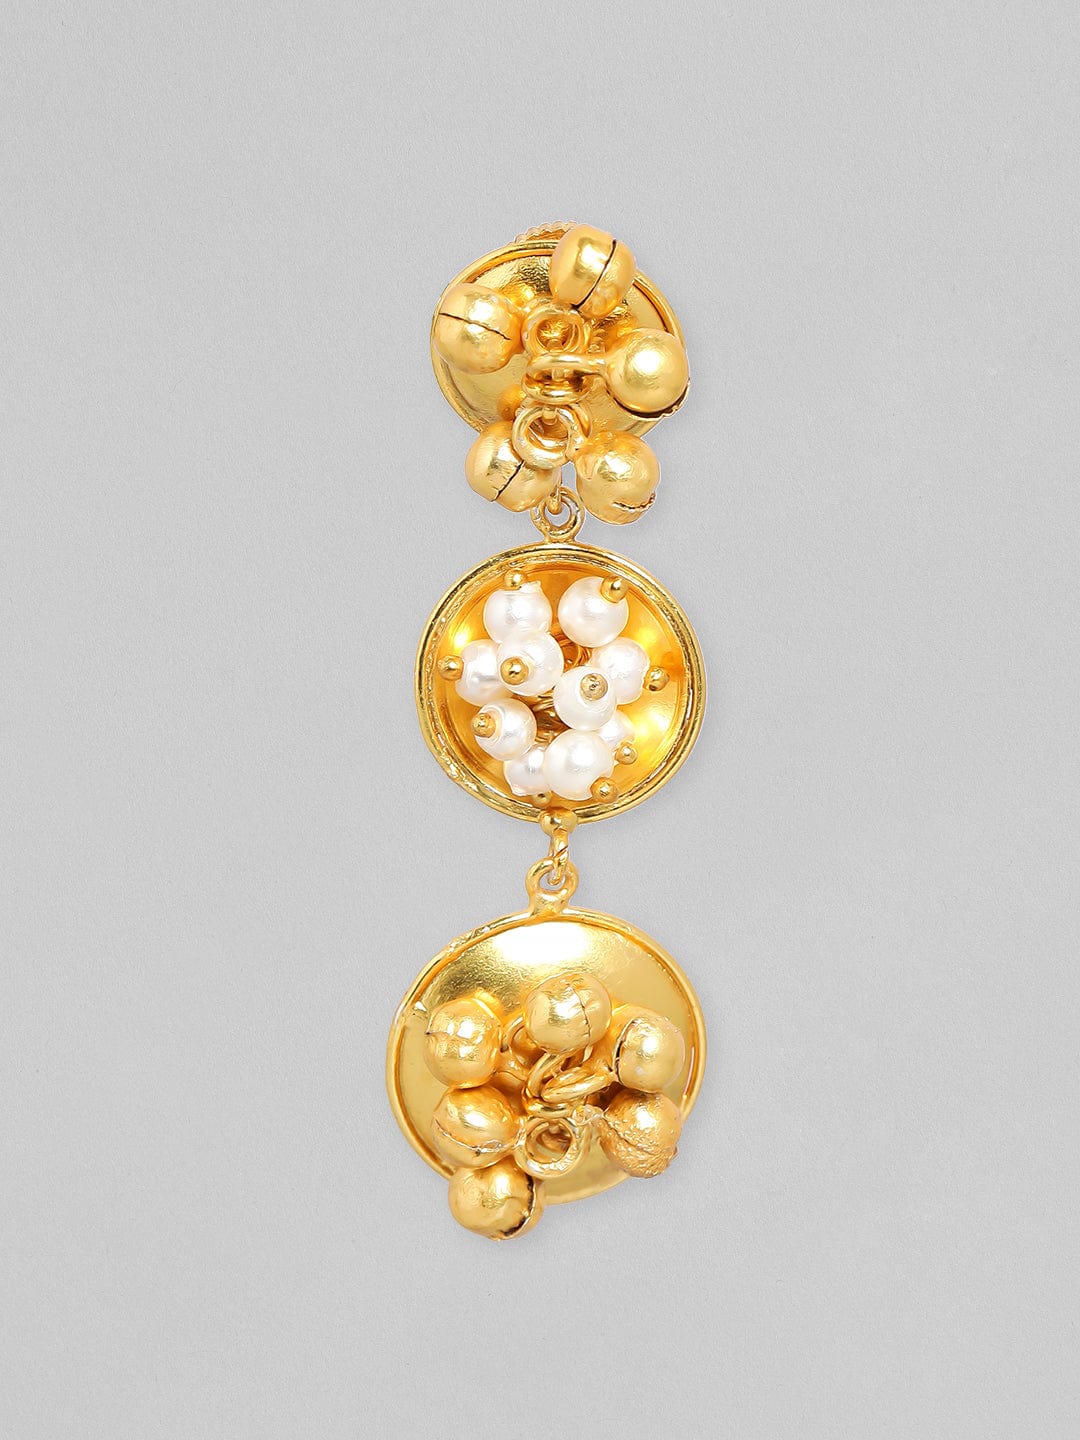 Rubans 24K Gold Plated Handcrafted Drop Earrings With Circular Design, Pearls And Beads Earrings